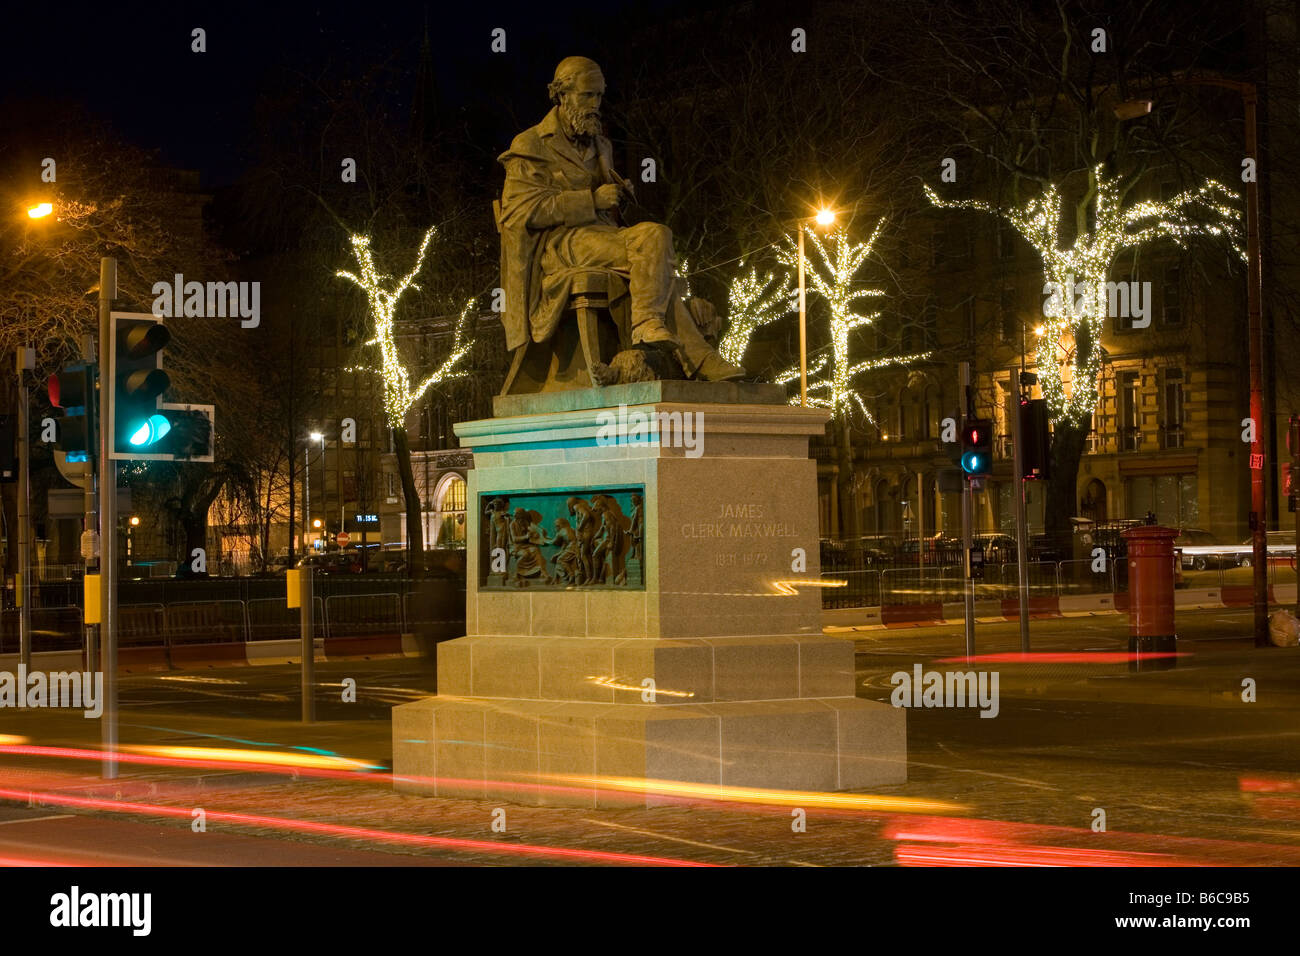 The James Clerk Maxwell statue at the east end of George St seen at night Stock Photo